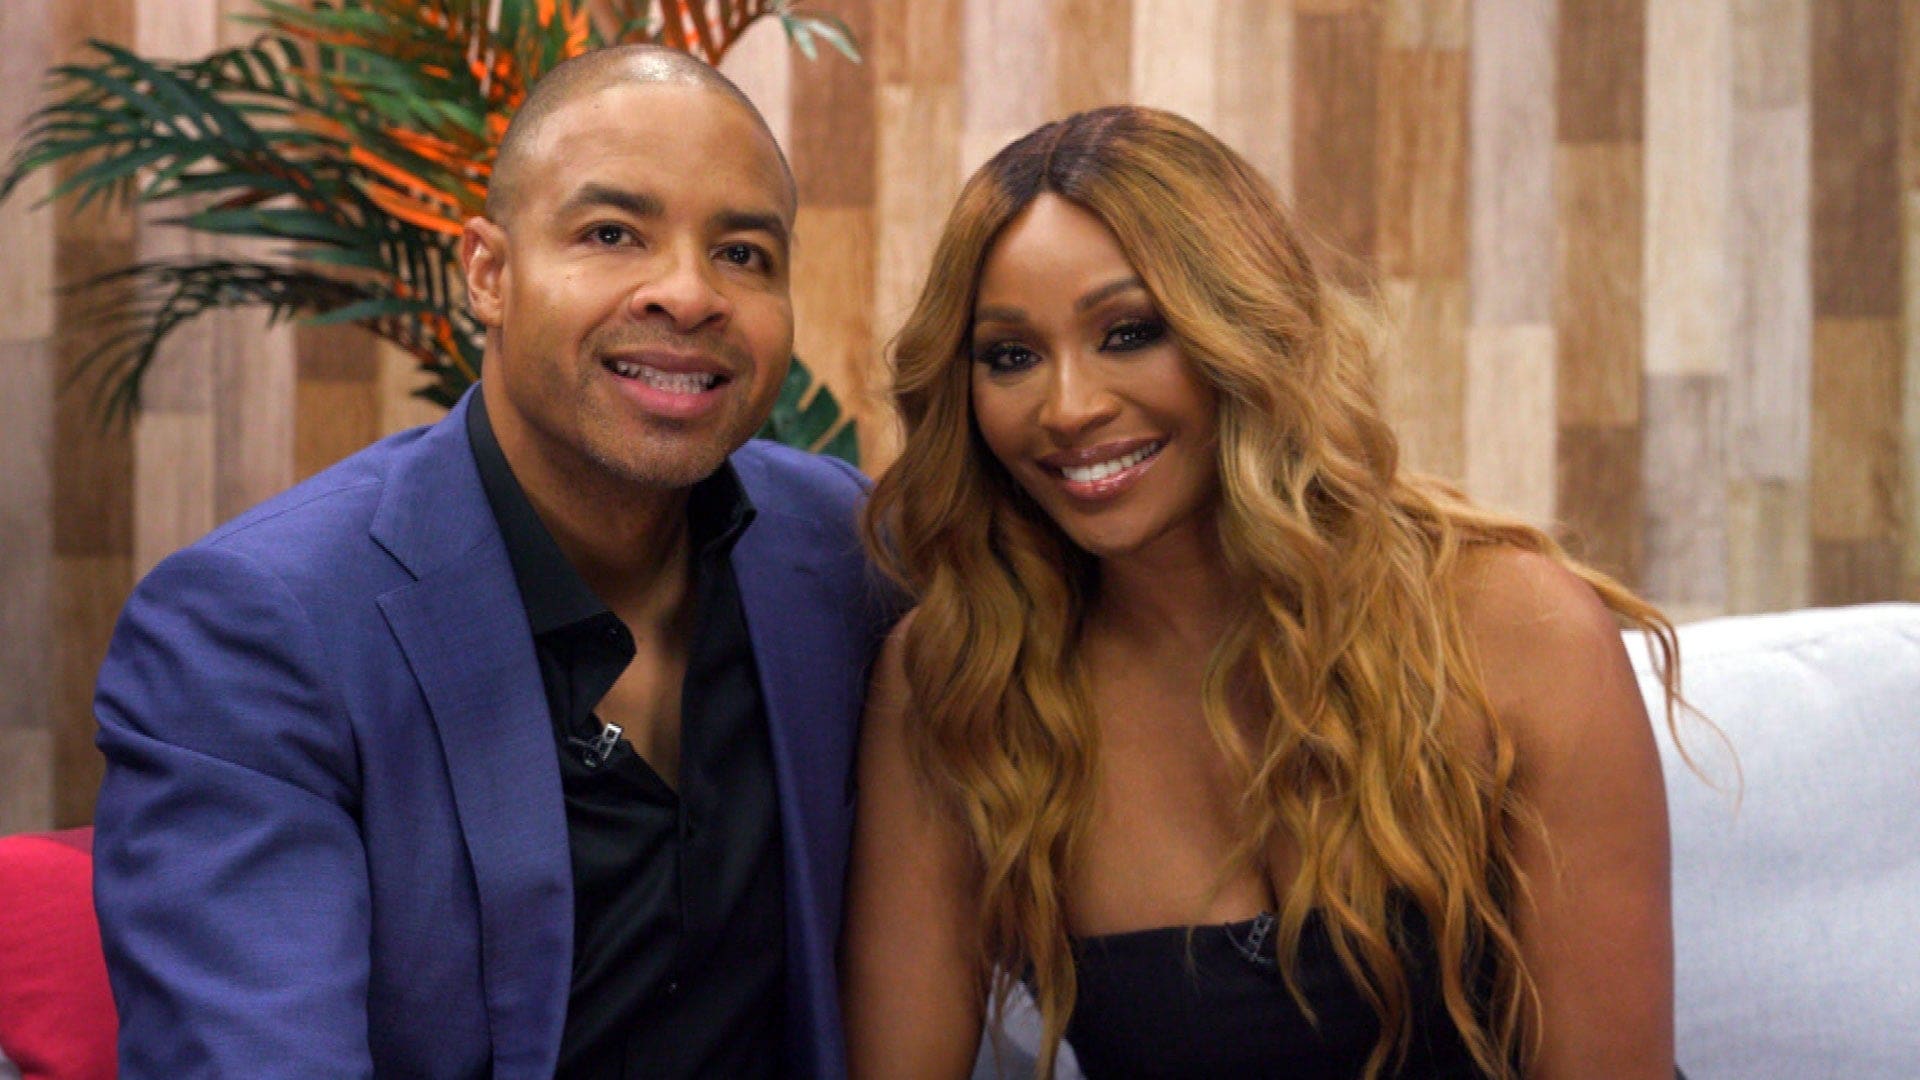 Cynthia Bailey's Photo With Mike Hill Has Fans Praising Them